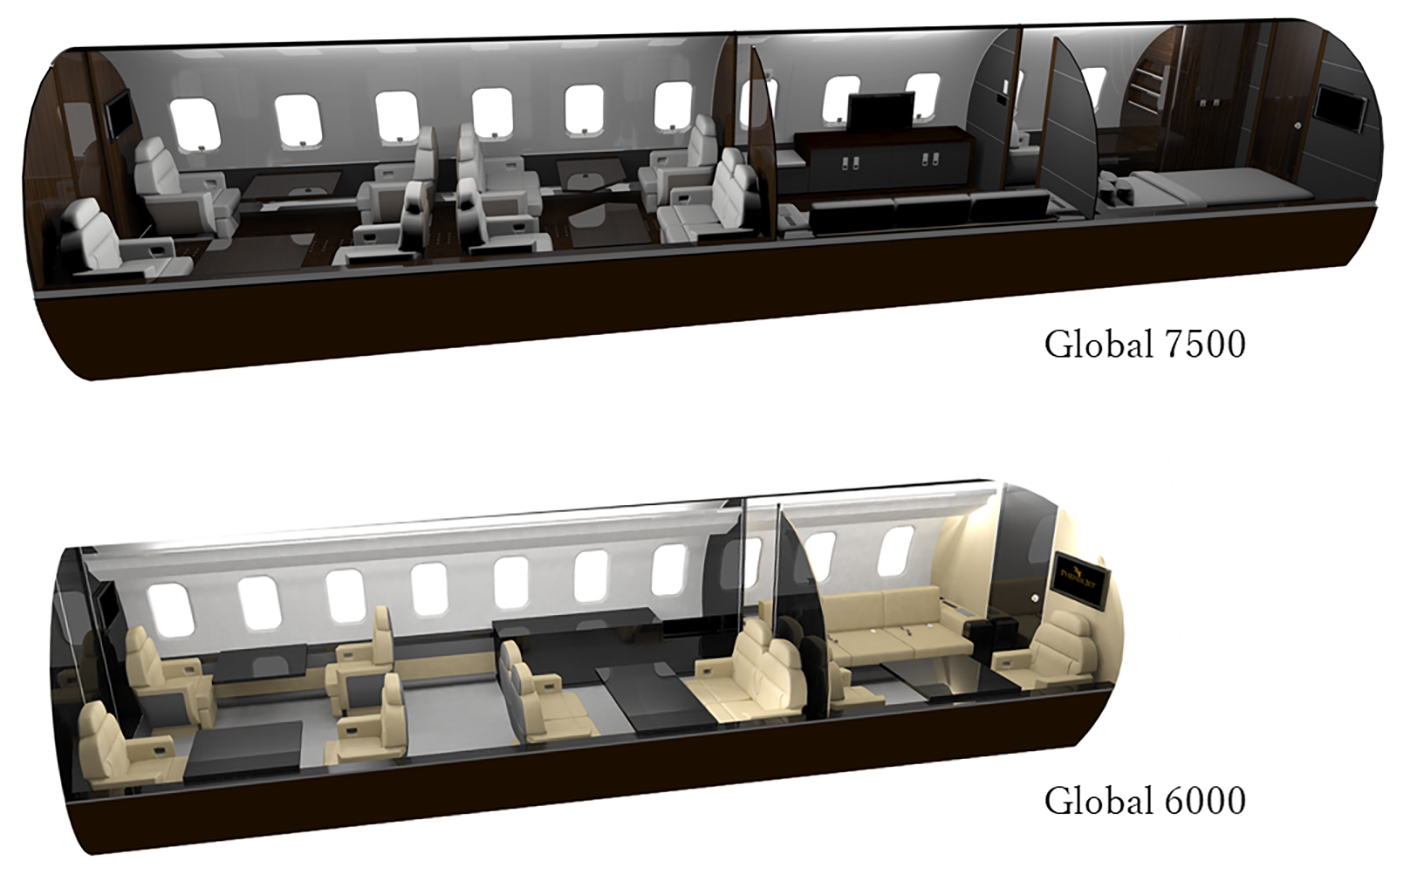 interiors of the new Global 7500 and former Global 6000